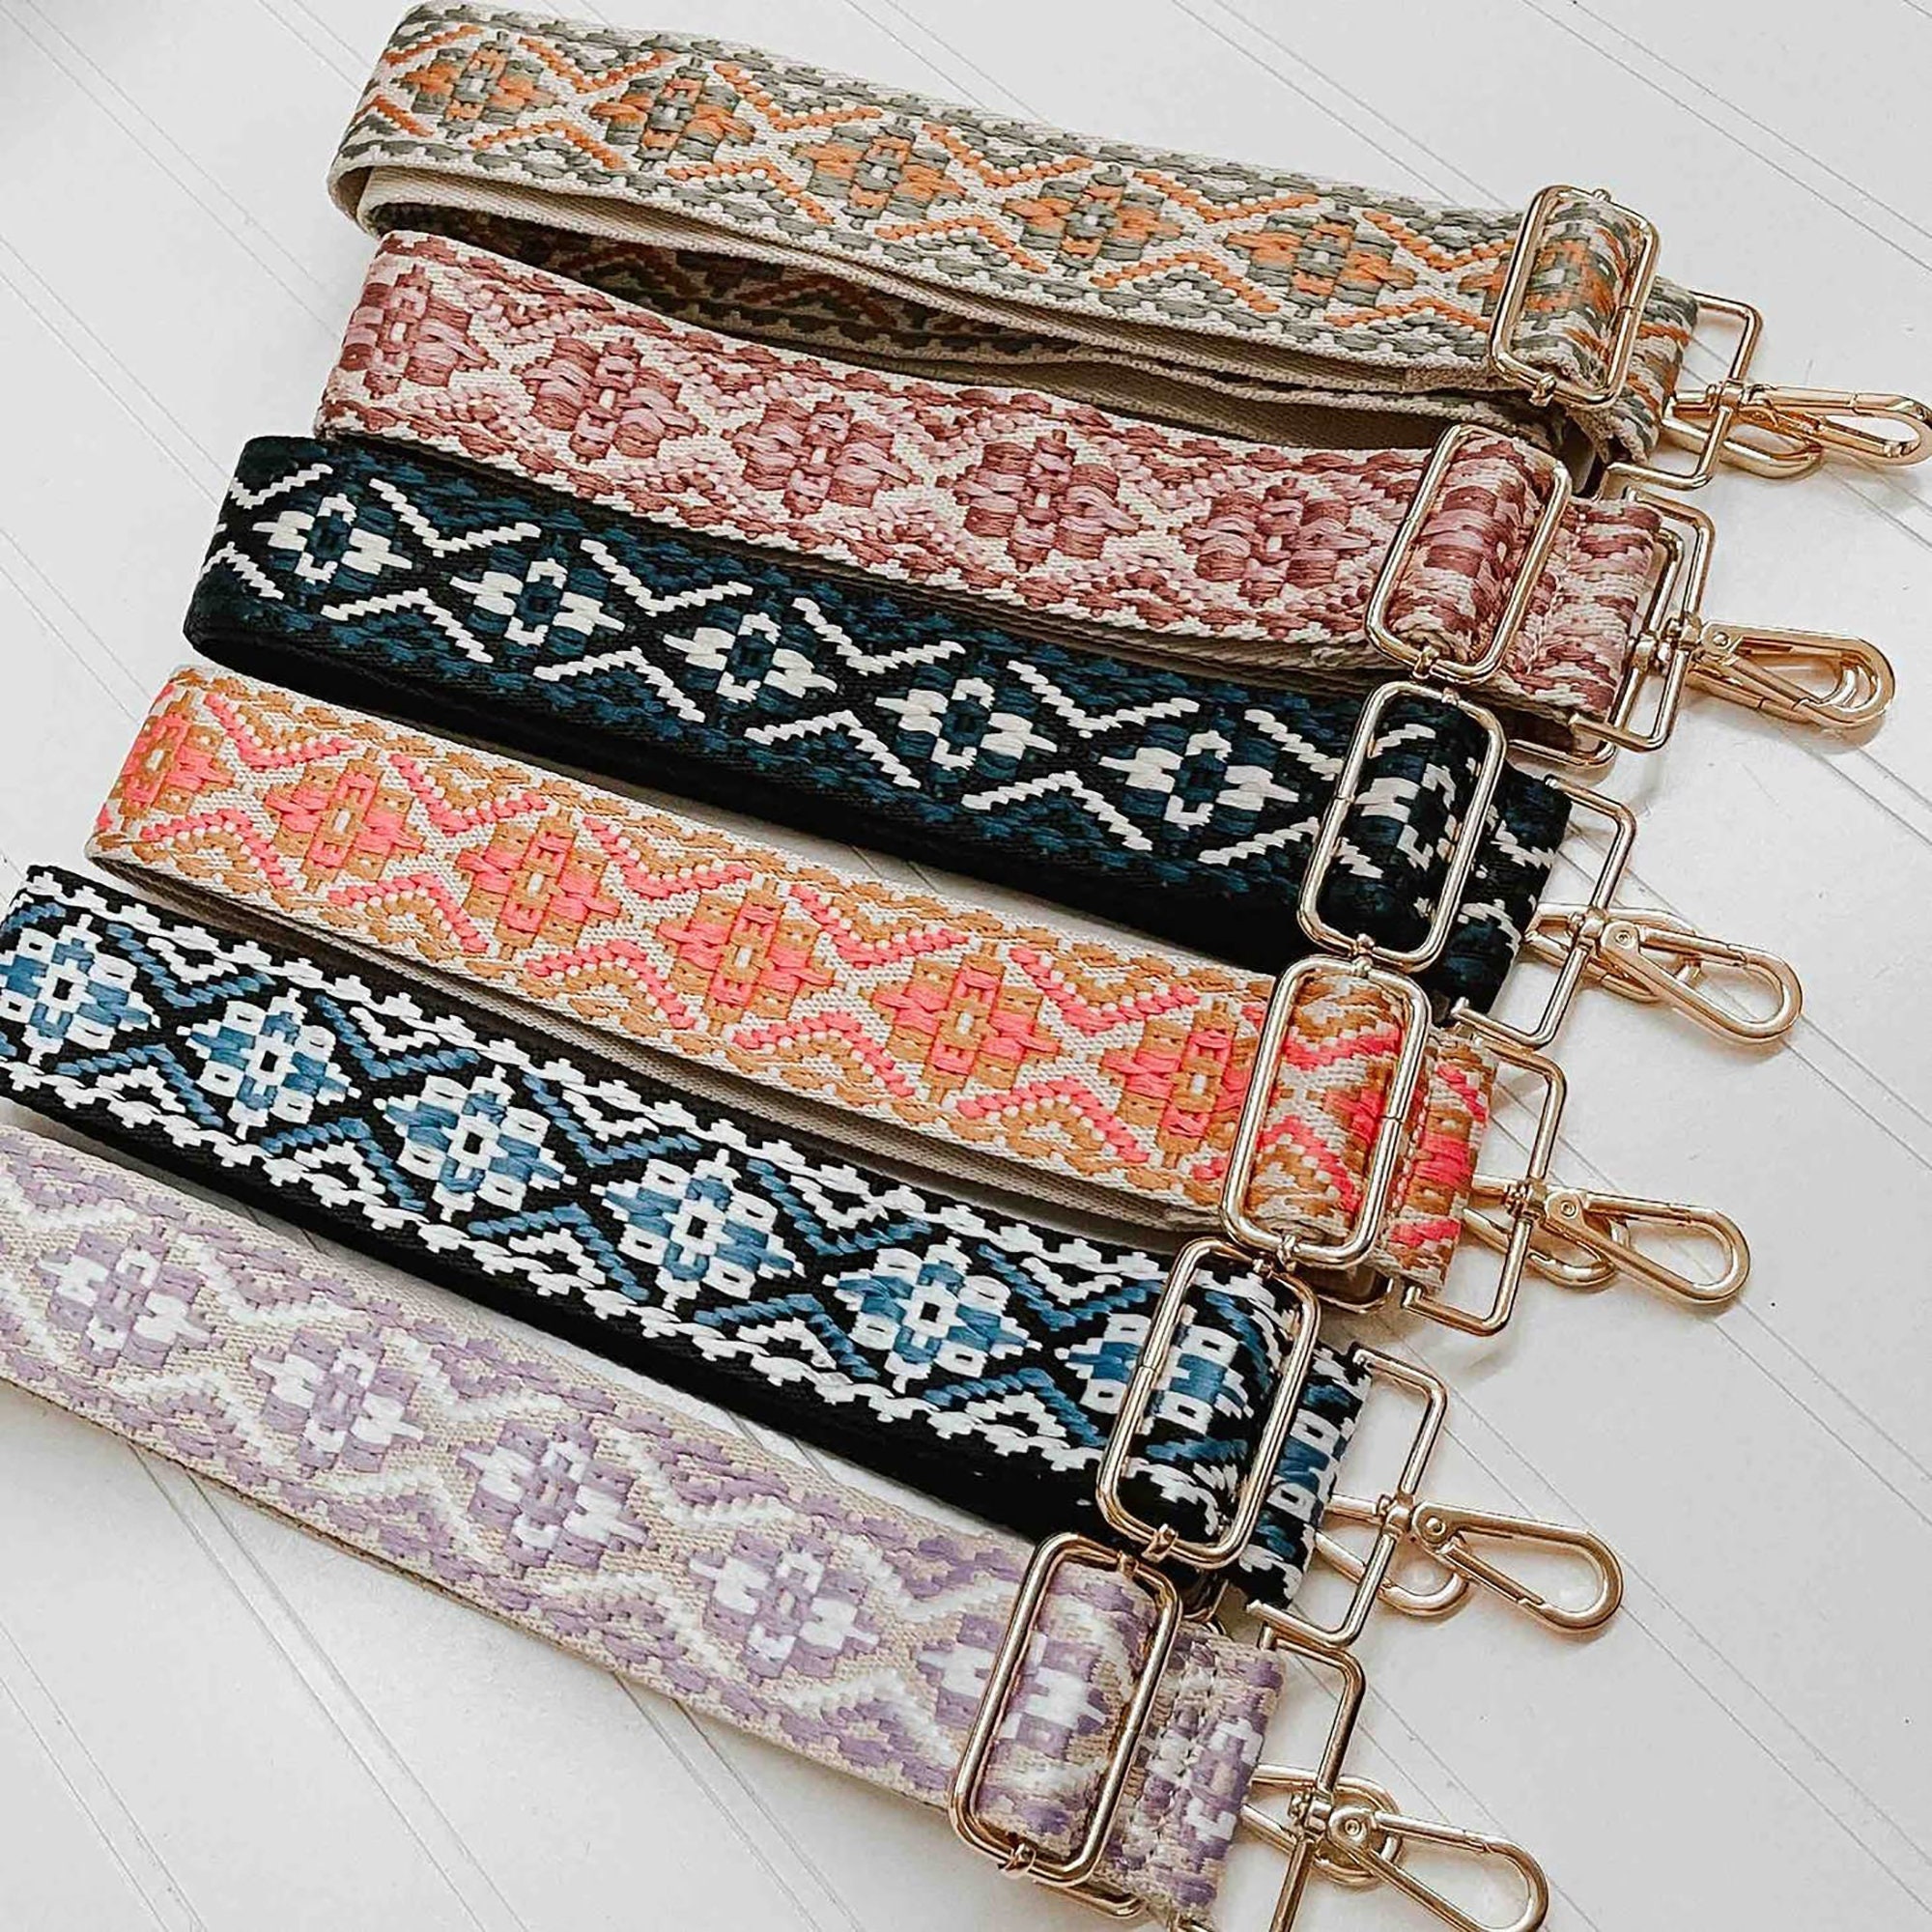 Purse Strap 2 Wide Purse Straps Replacement Crossbody Adjustable Leather  Bag Strap with Vintage Jacquard Embroidery Bohemia Pattern 